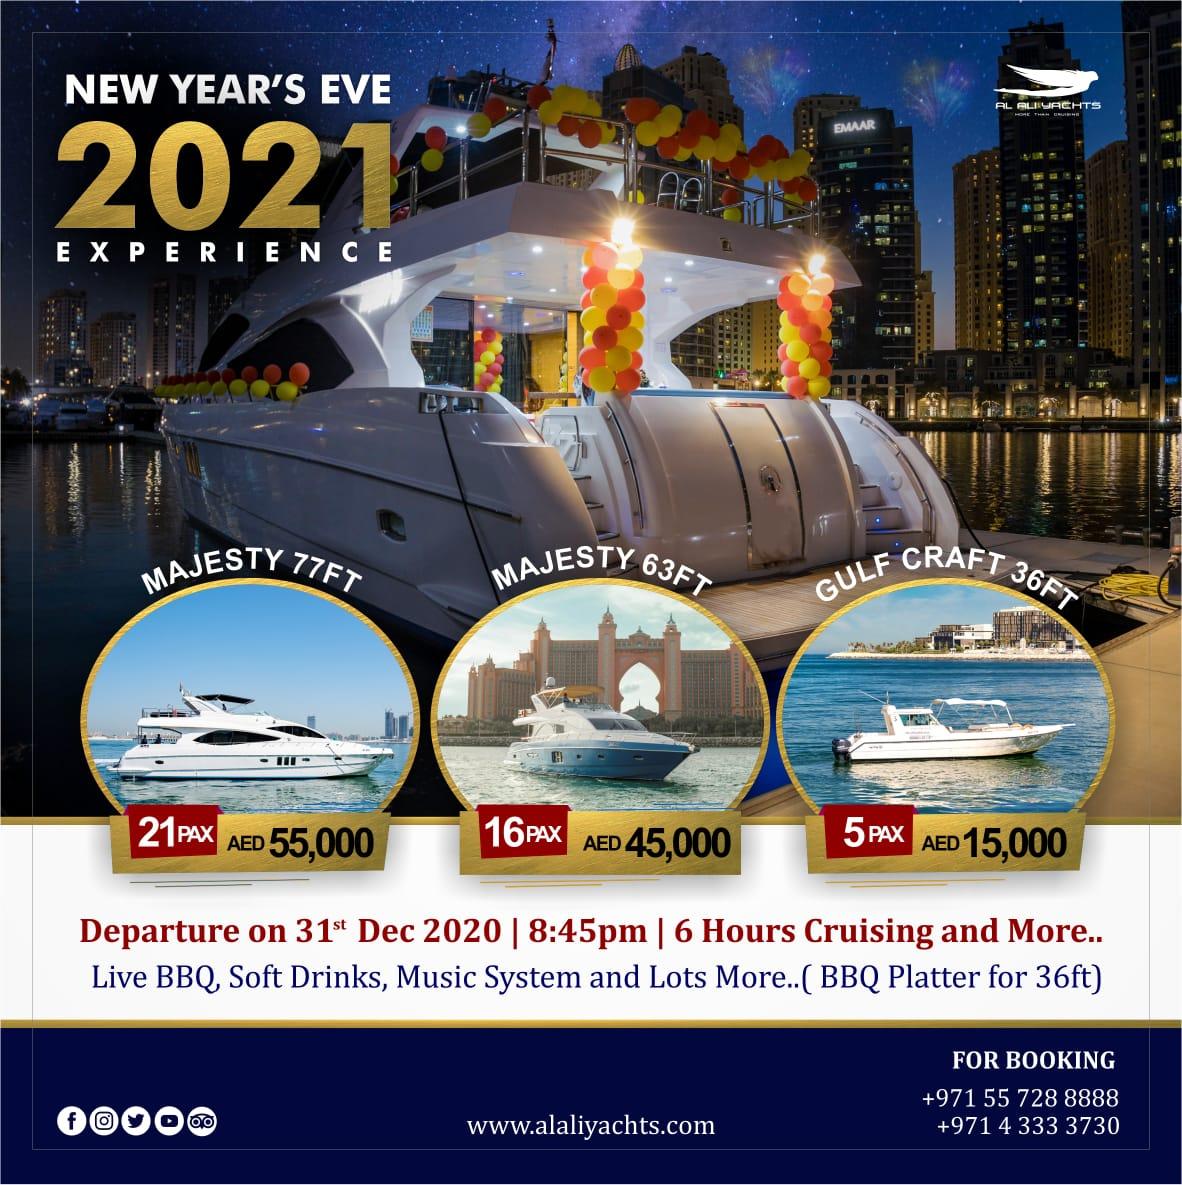 EXPERIENCE THE LUXURY YACHT CHARTER NEW YEAR'S EVE 2021 FIREWORK IN DU